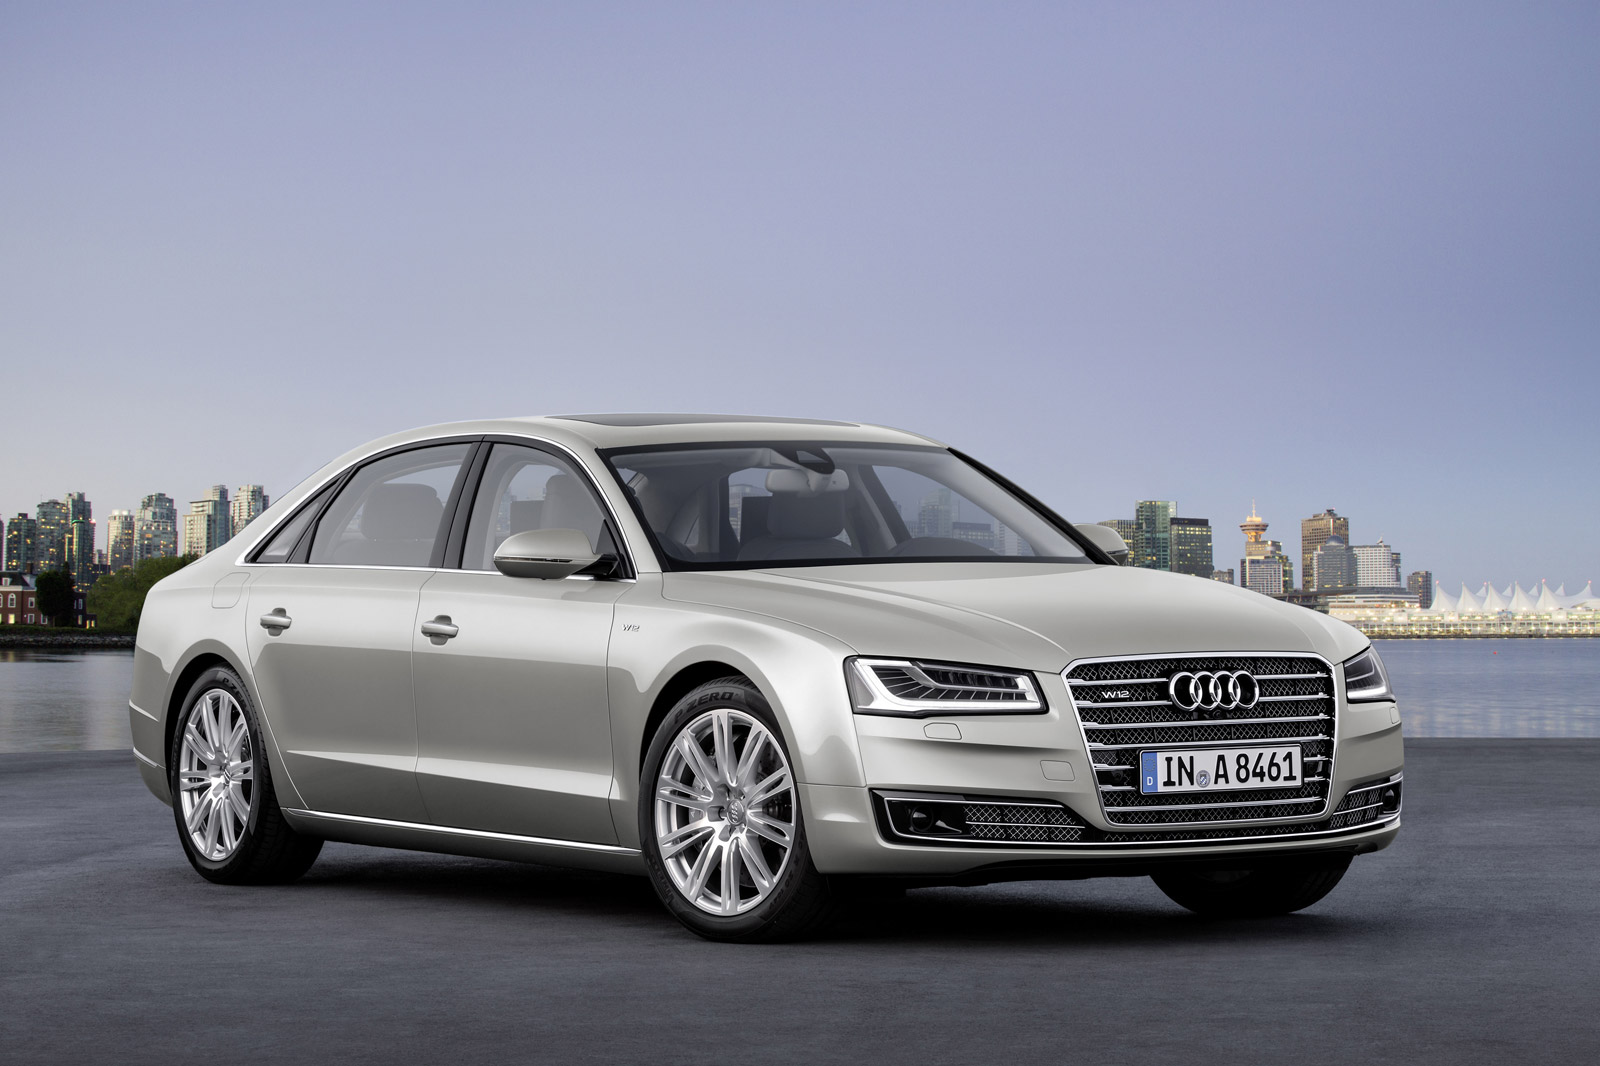 2015 Audi A8 Review, Ratings, Specs, Prices, and Photos - The Car Connection